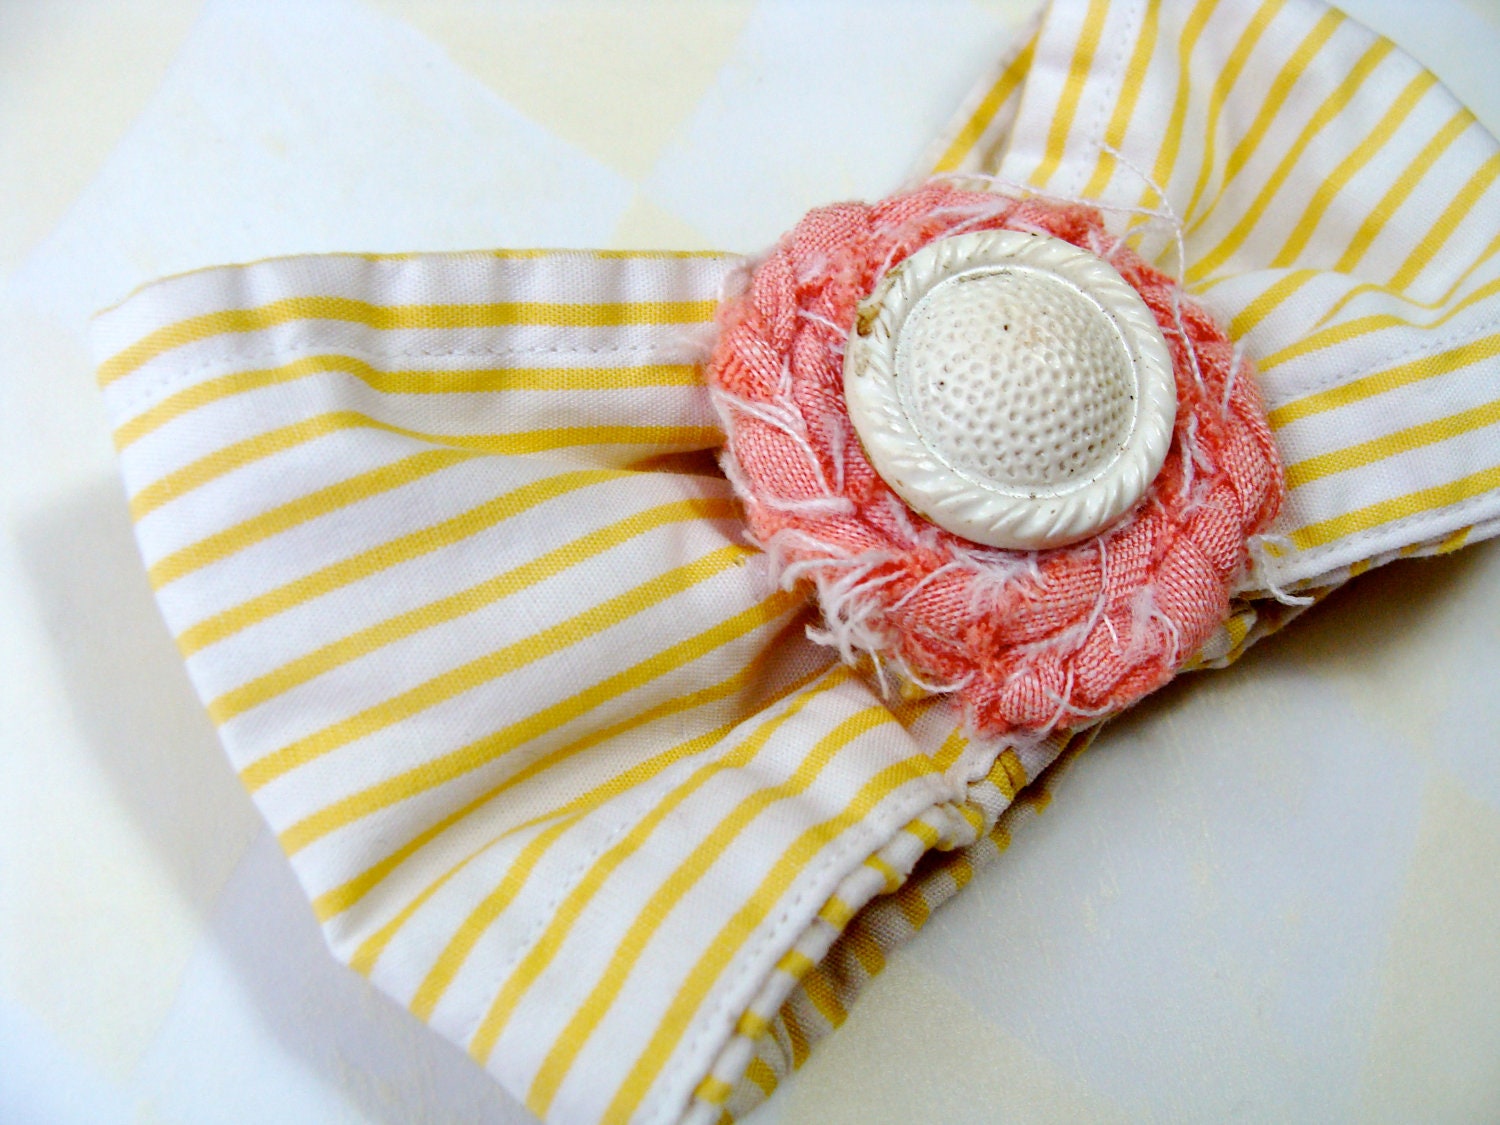 upcycled hair bow from ChatterBlossom on Etsy with stripes of yellow, pink braided center and vintage white button